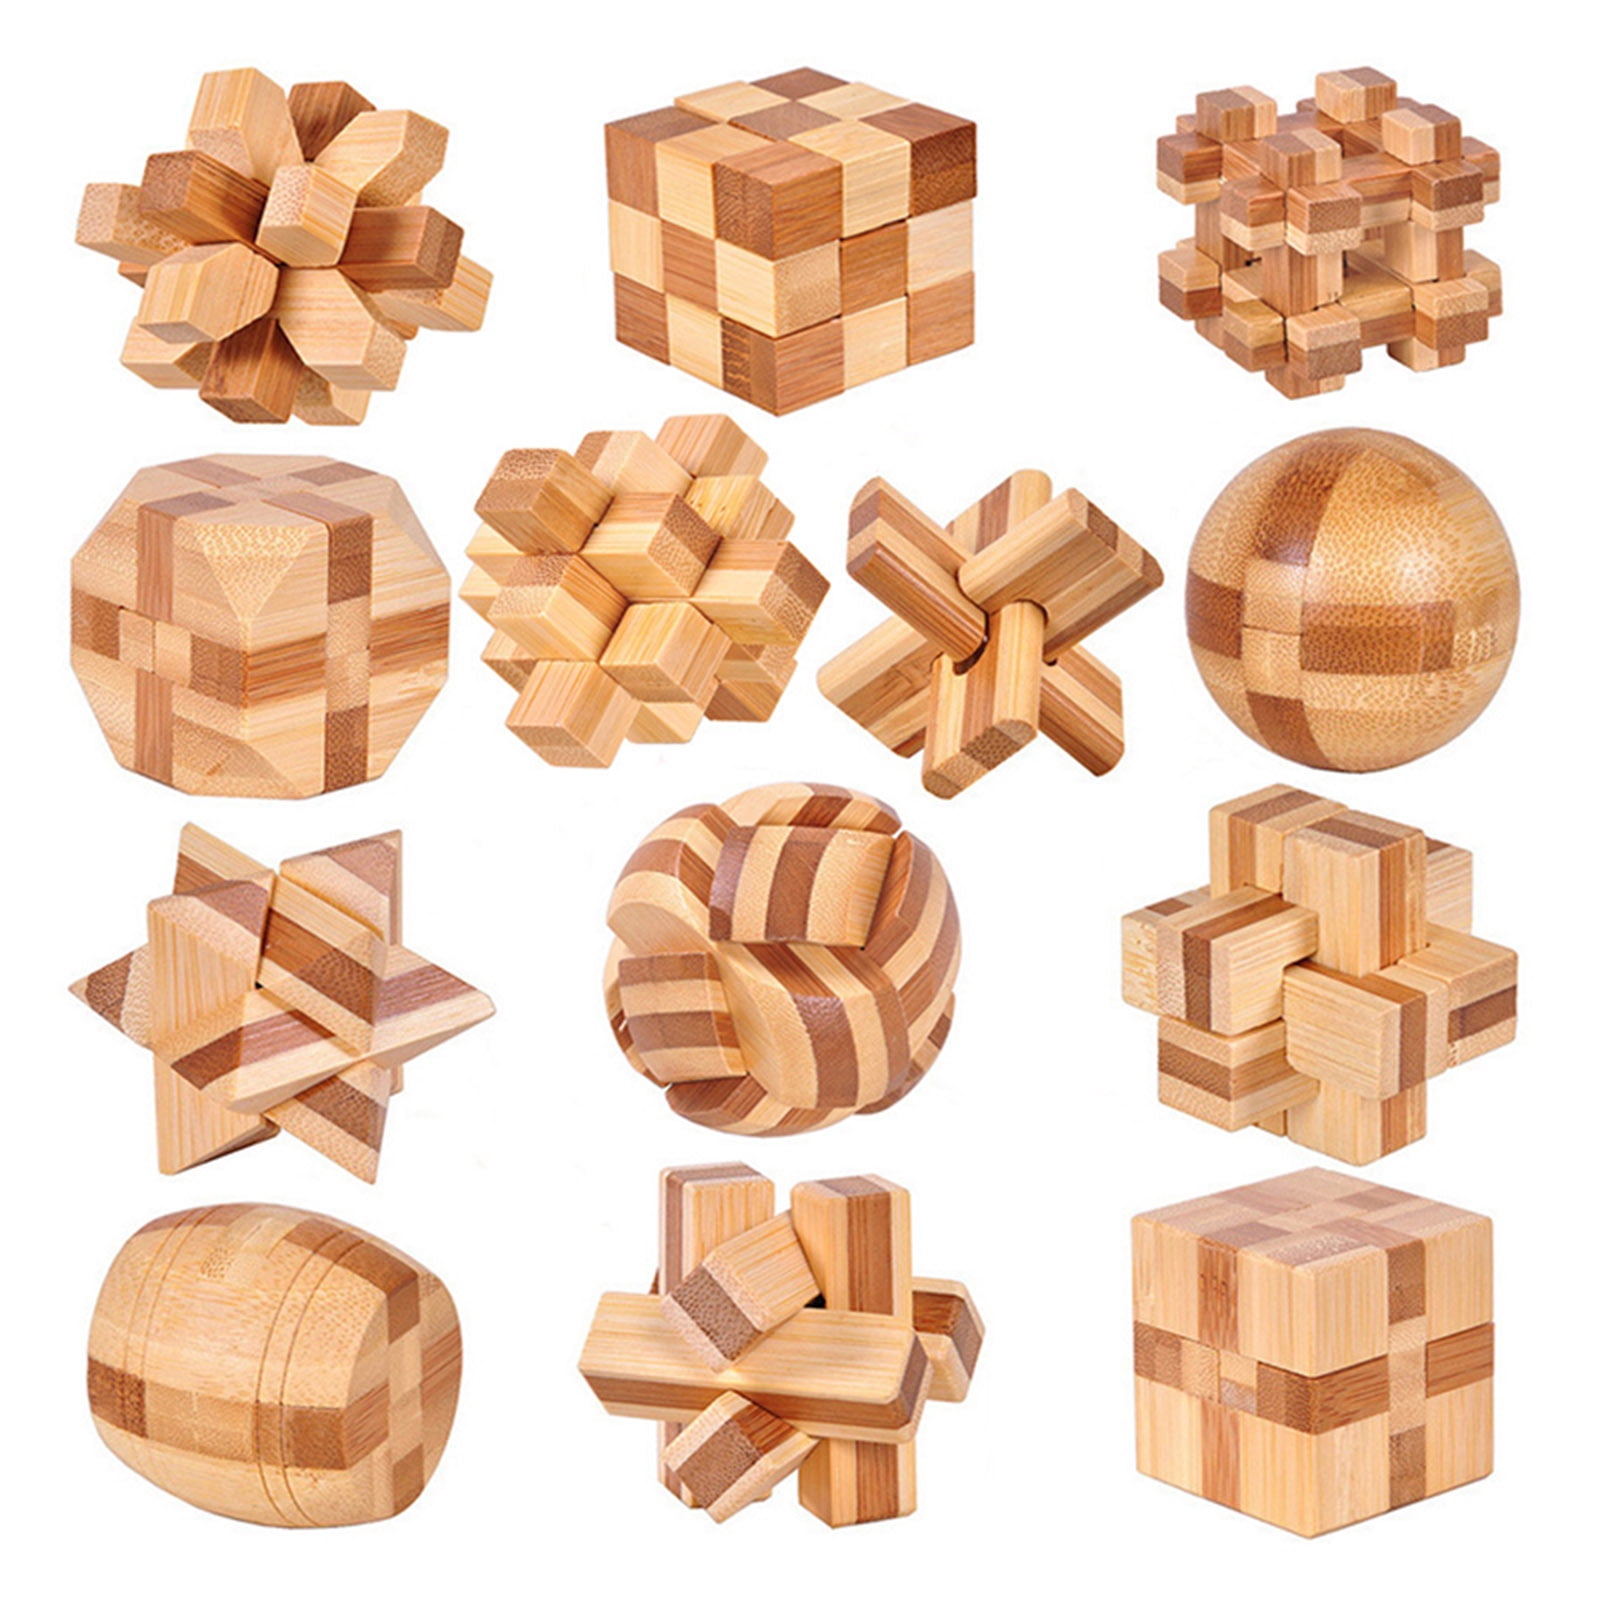 Lock Kong Ming Toy Wooden Puzzle Brain Teaser Toys Kids Luban Intelligence New 